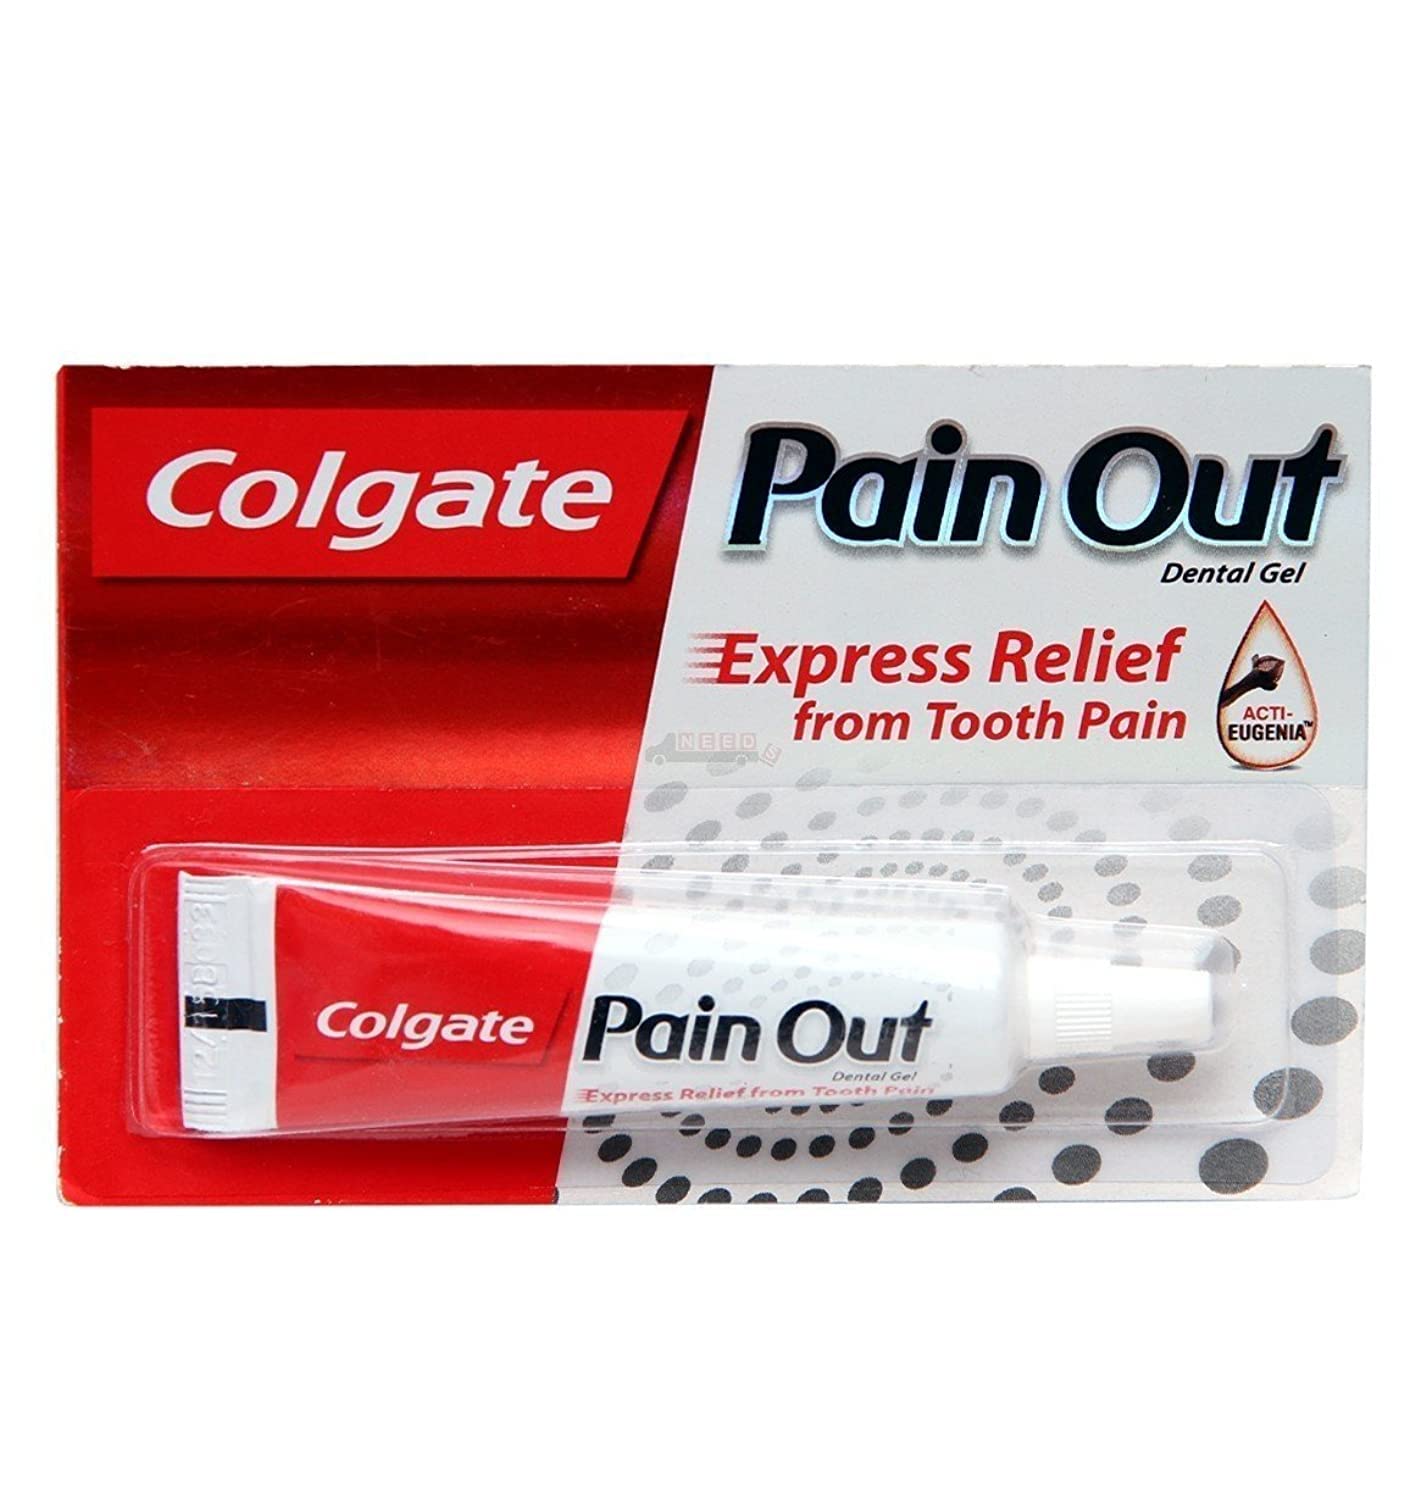 Colgate Pain Out Dental Gel - Express Relief from Tooth Pain - Ayurvedic Medicine with Clove Oil - Just 1 Drop - 10 g